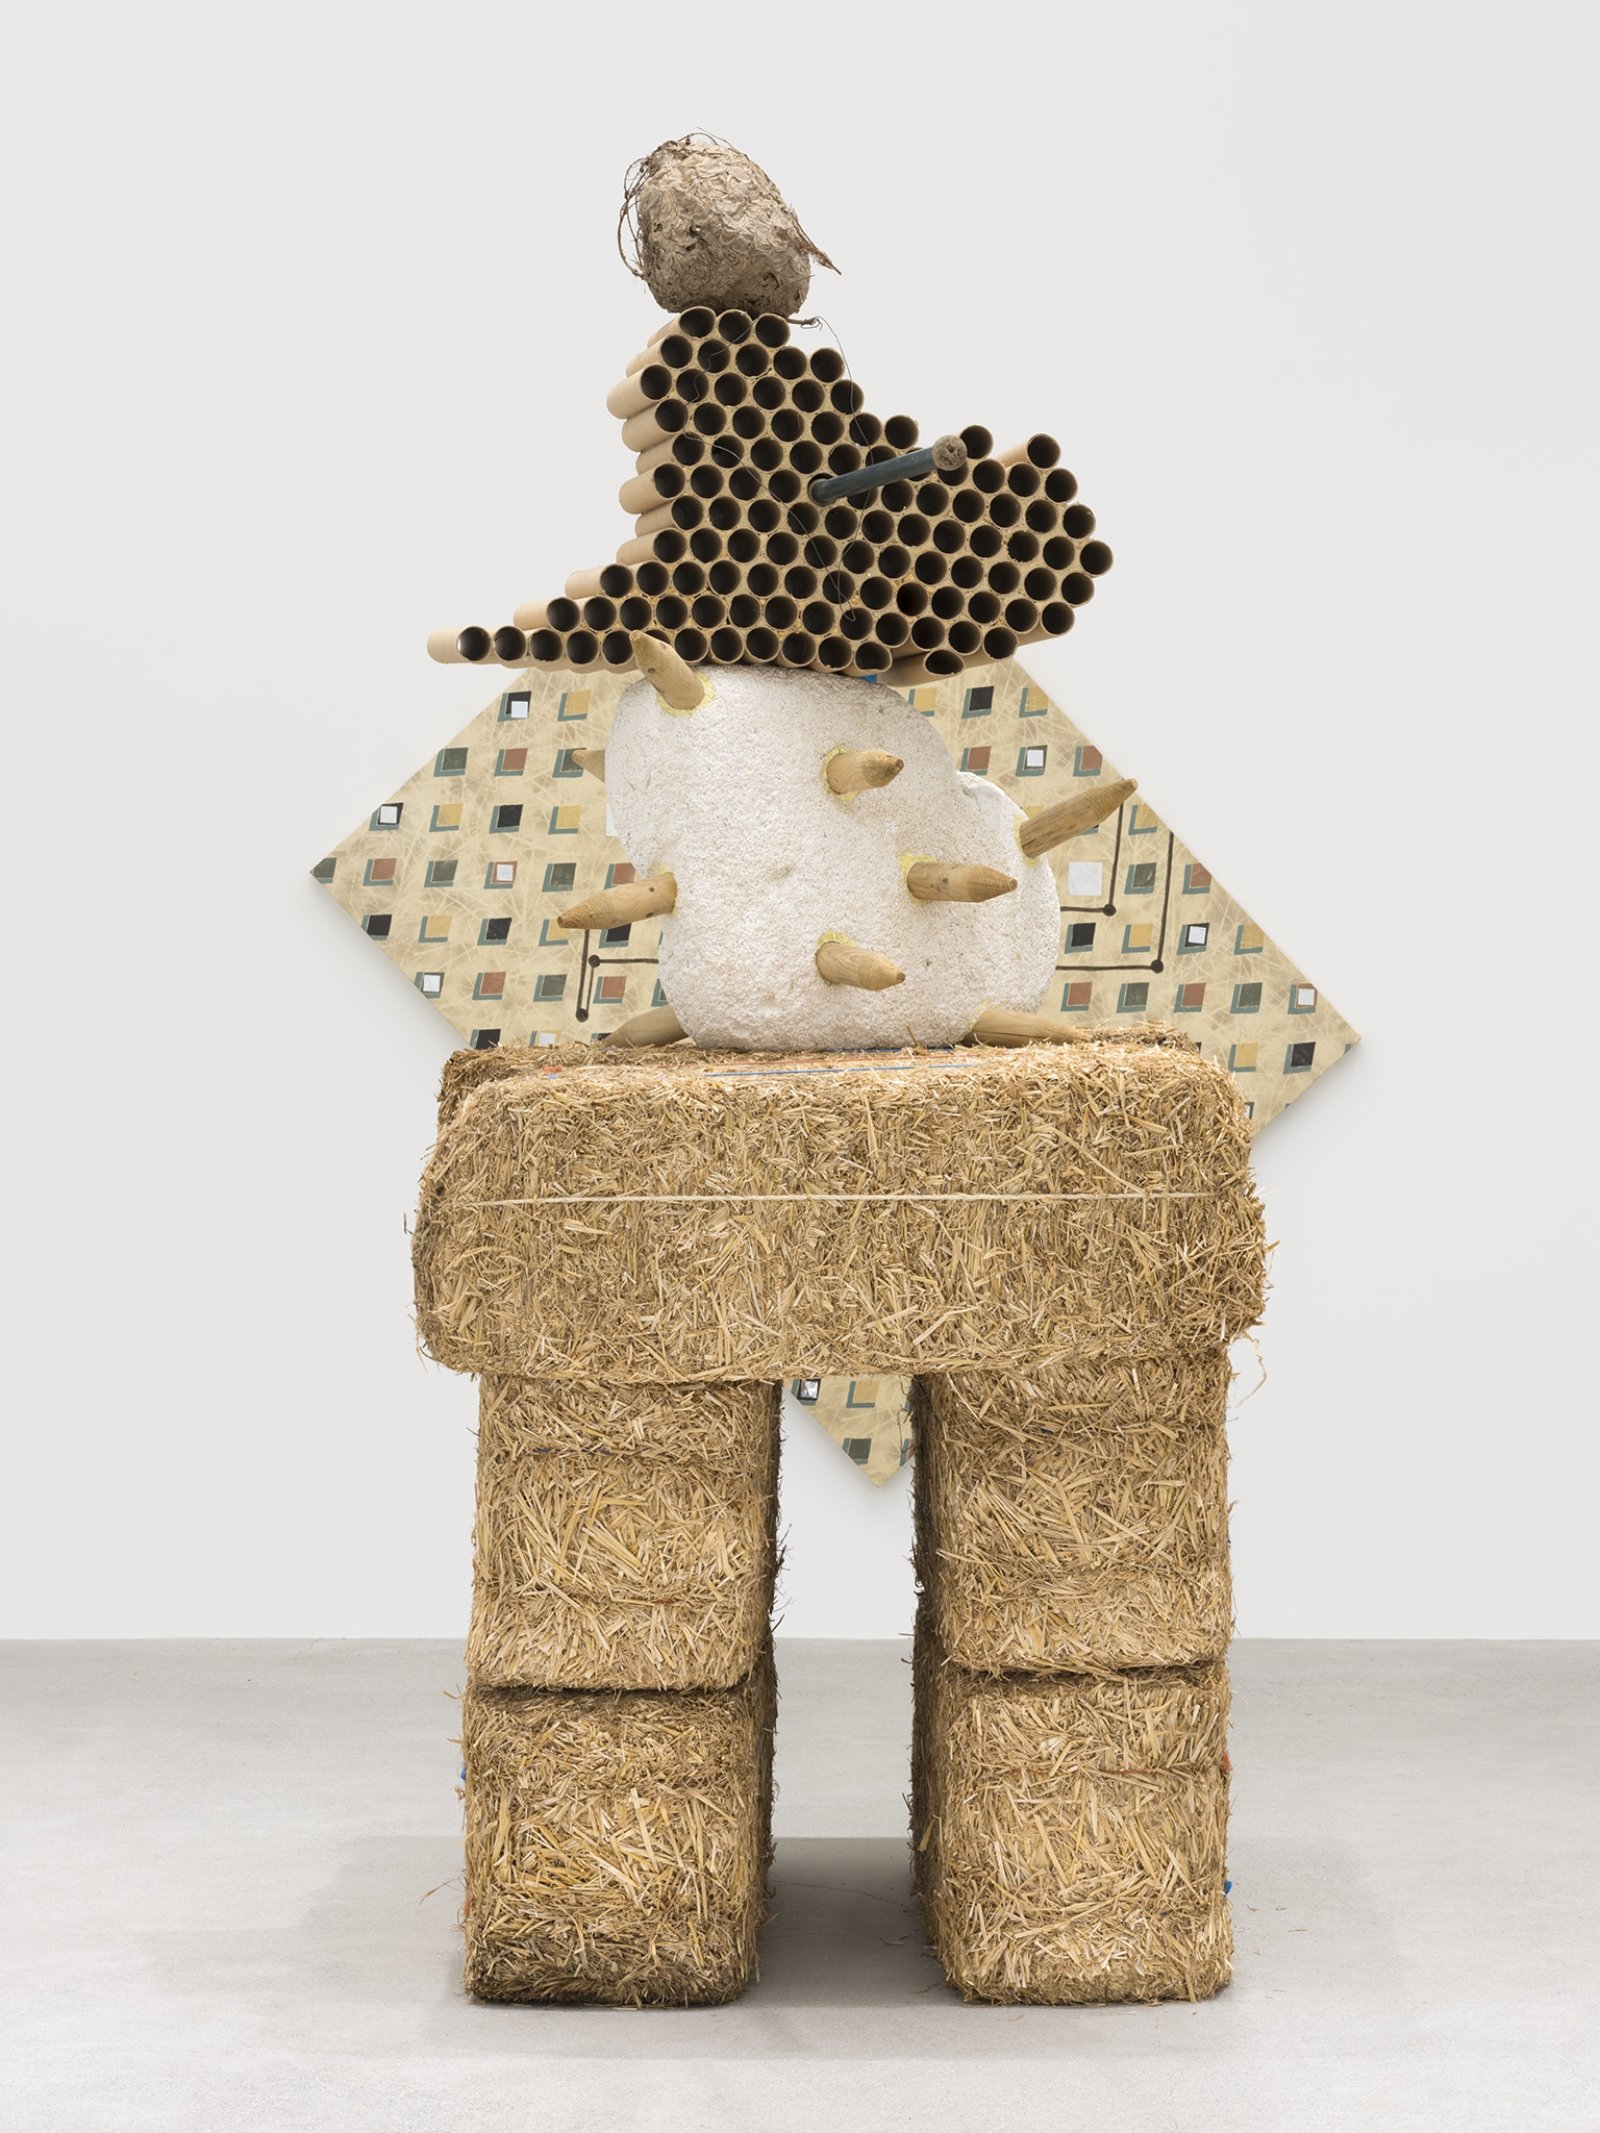 Jerry Pethick, Gobi Clone, 1996/1997, straw bales, styrofoam, wood, cardboard, hornet’s nest, anodized aluminum, polypropylene rope, cloth, orange rubber, iron wire, sulphur, dried fir needles, 107 x 55 x 46 in. (272 x 140 x 117 cm). Installation view, Unexplained Parade, Catriona Jeffries, Vancouver, February 9, 2019